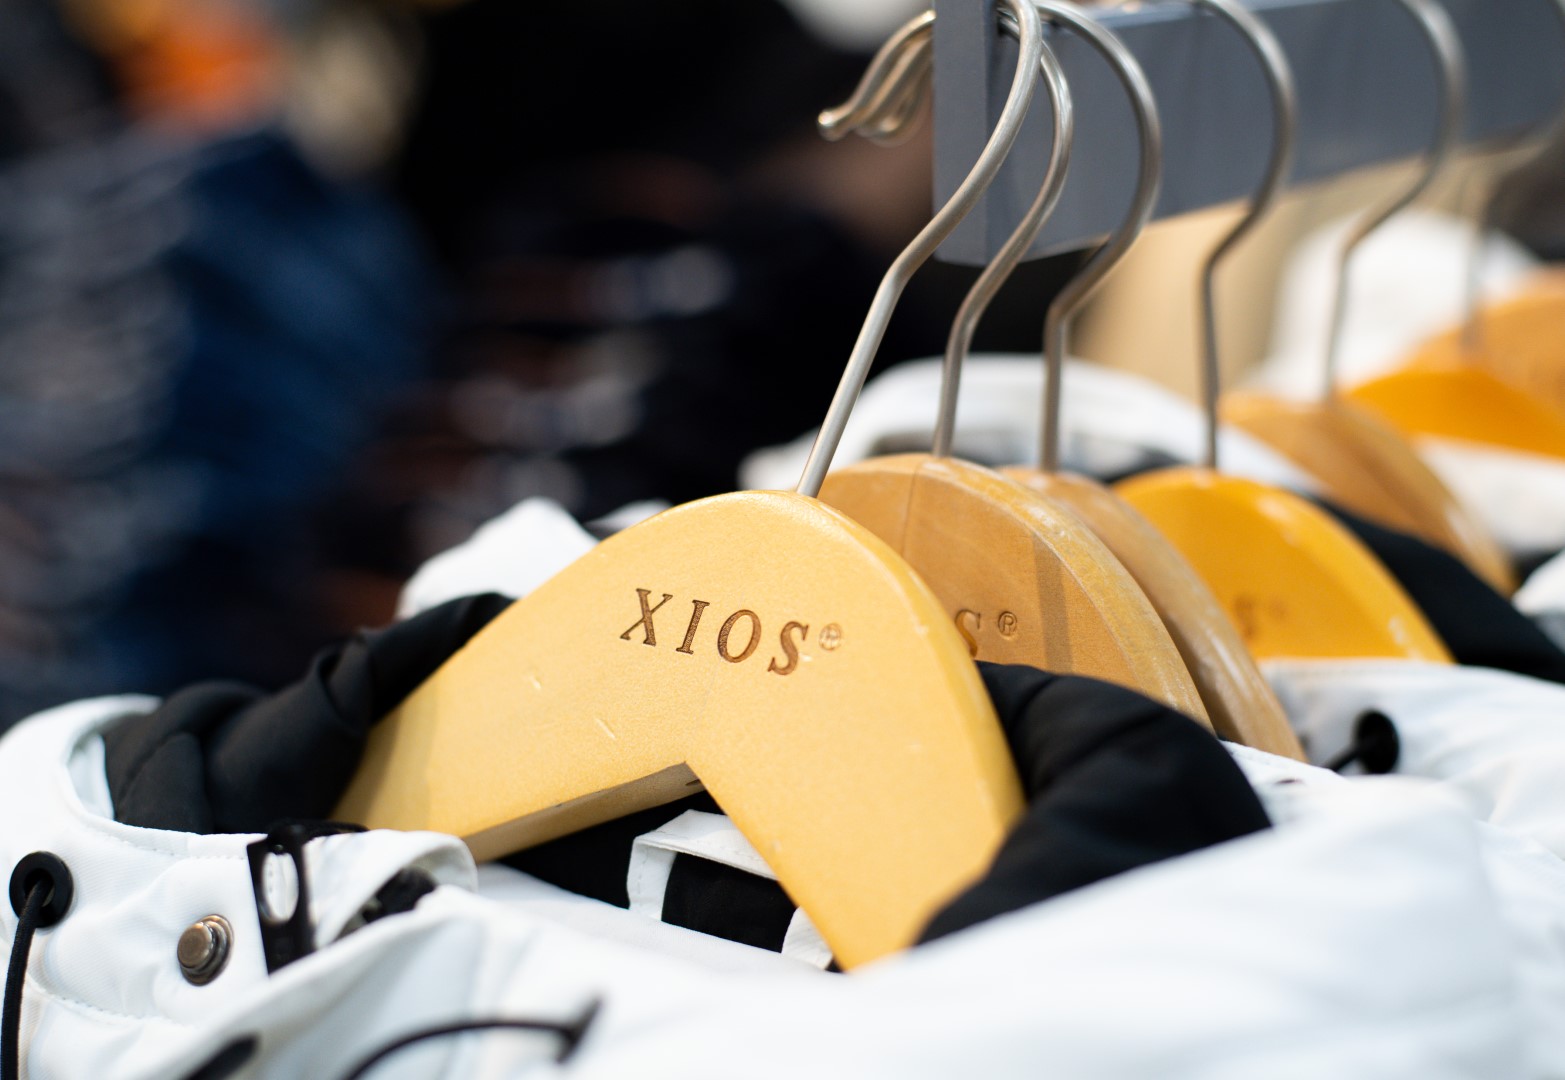 Close-up of white shirts hanging on wooden hangers labeled "xios" in a clothing store, with a blurred background of other apparel.